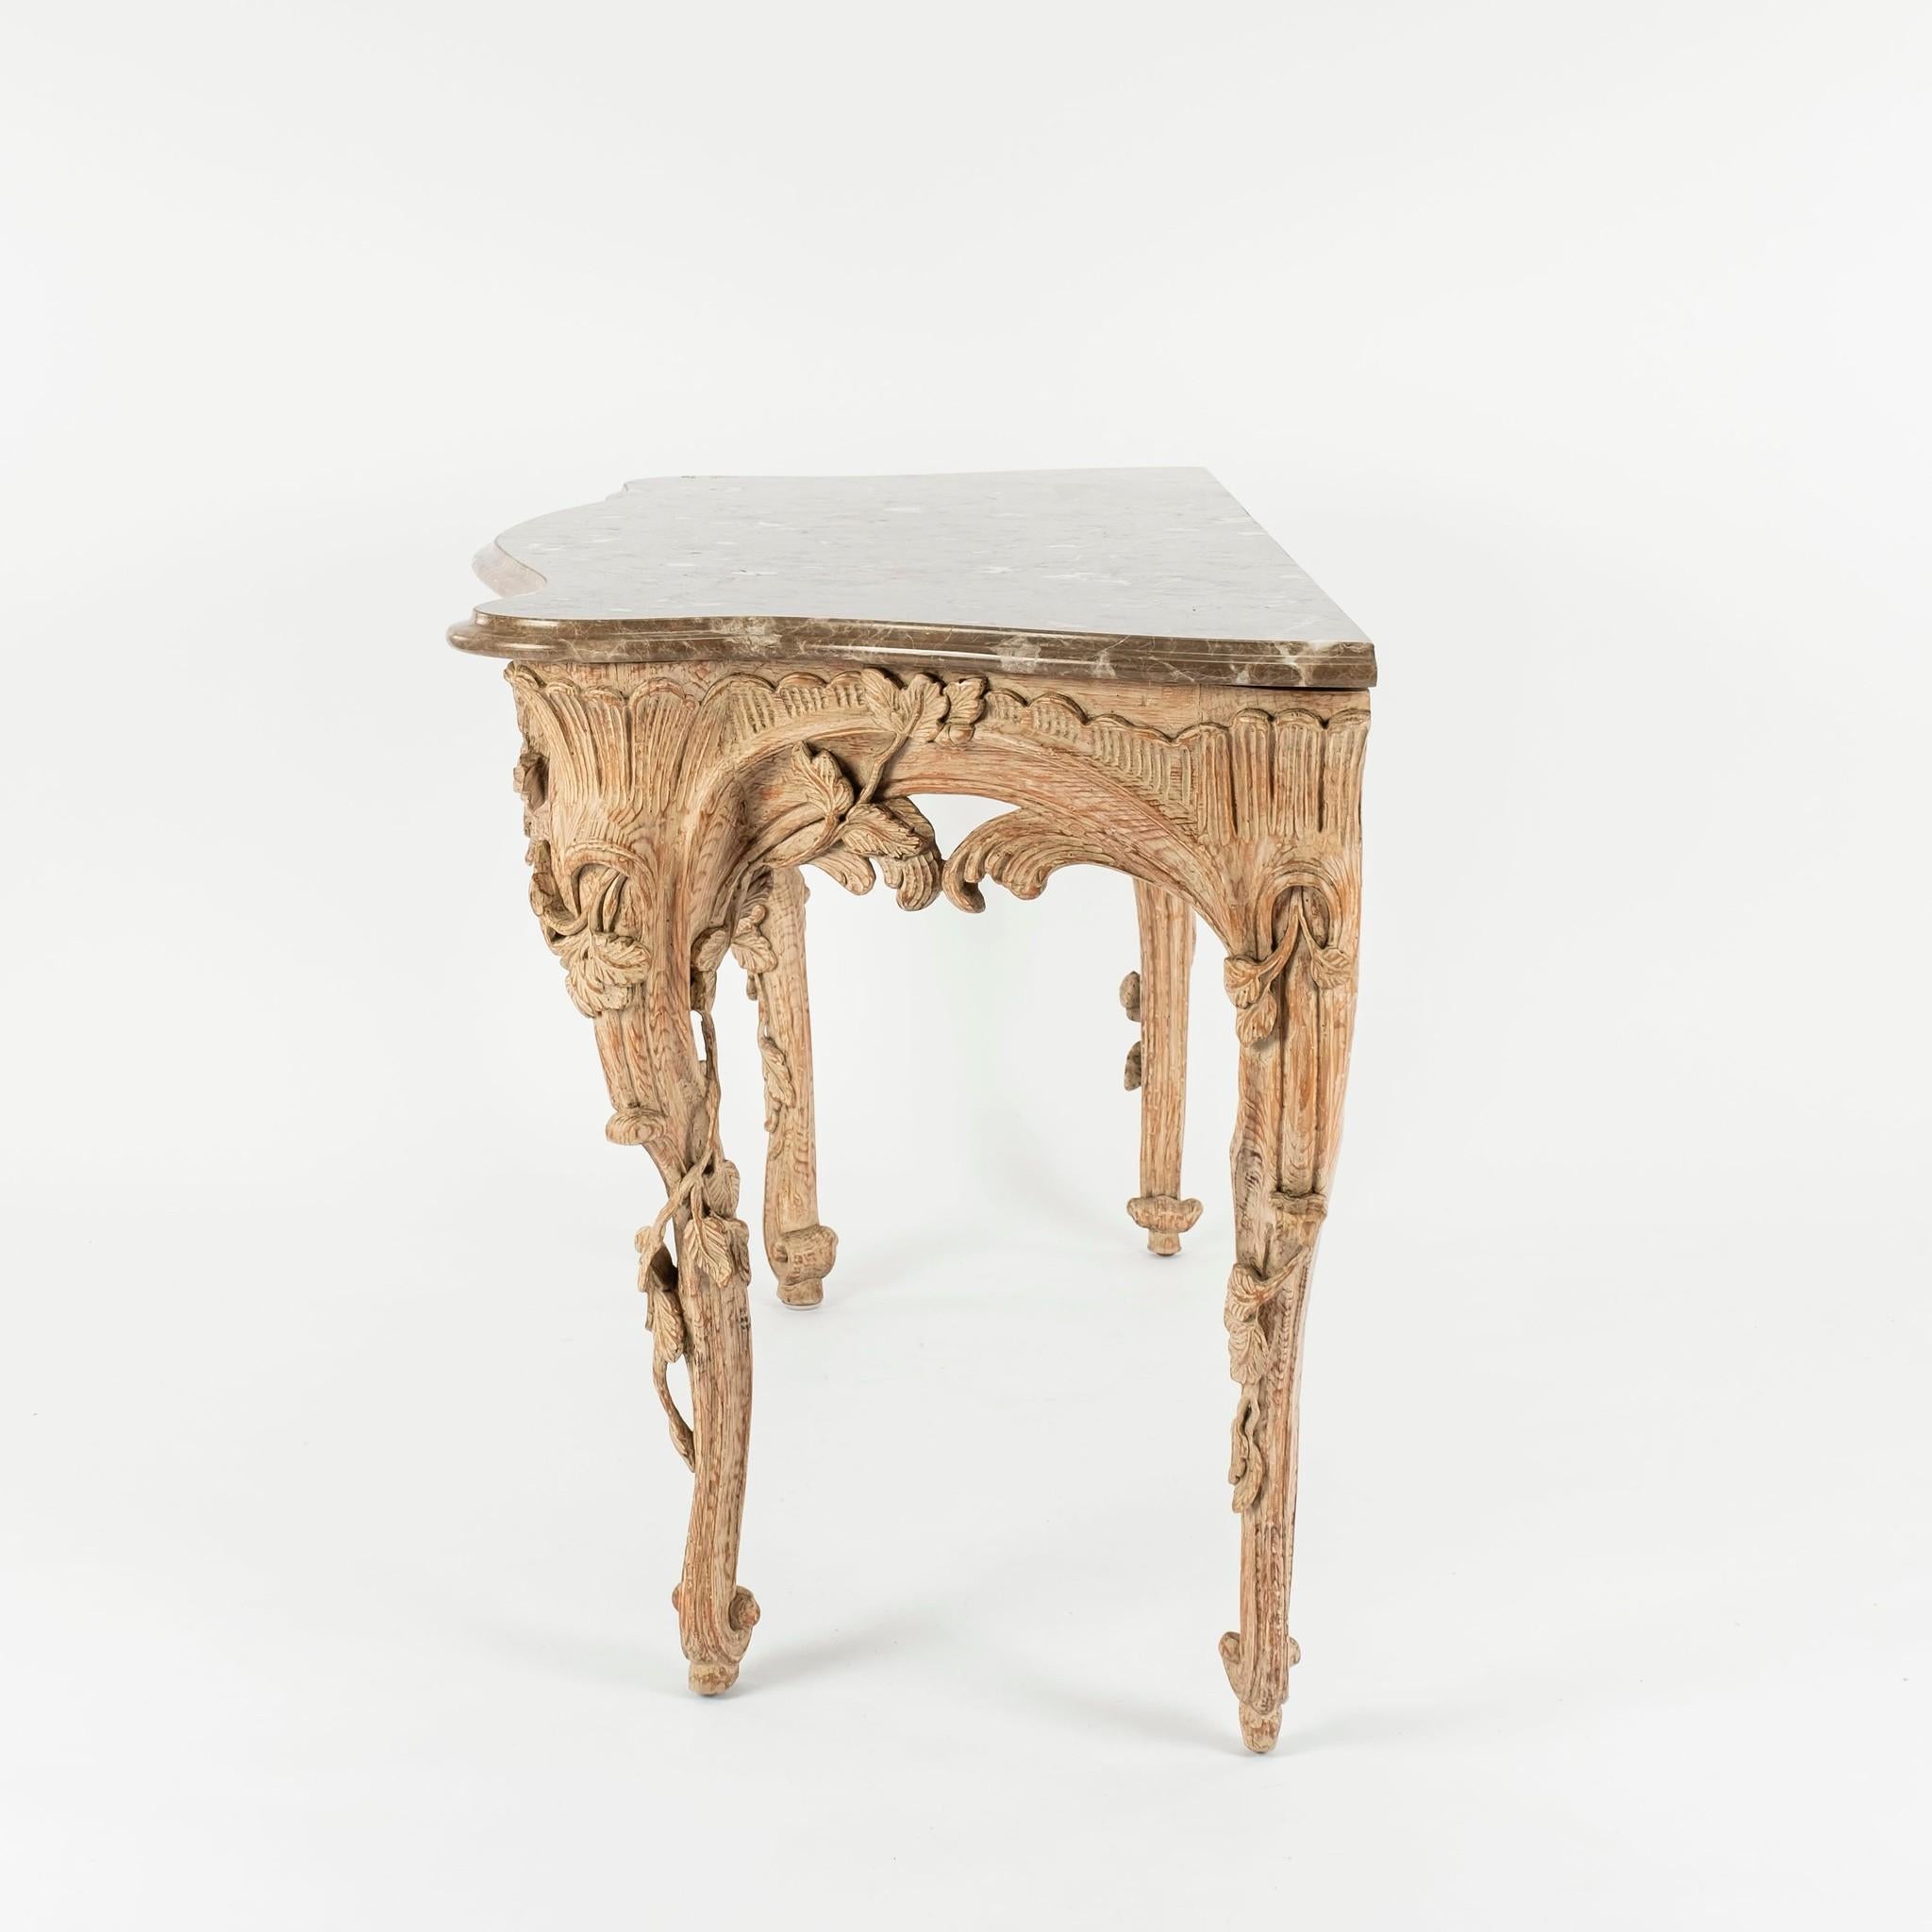 20th century hand craved bleached wood Rococo style console with brown marble top. Lovely shell cartouche, oak foliage and scroll work detail.